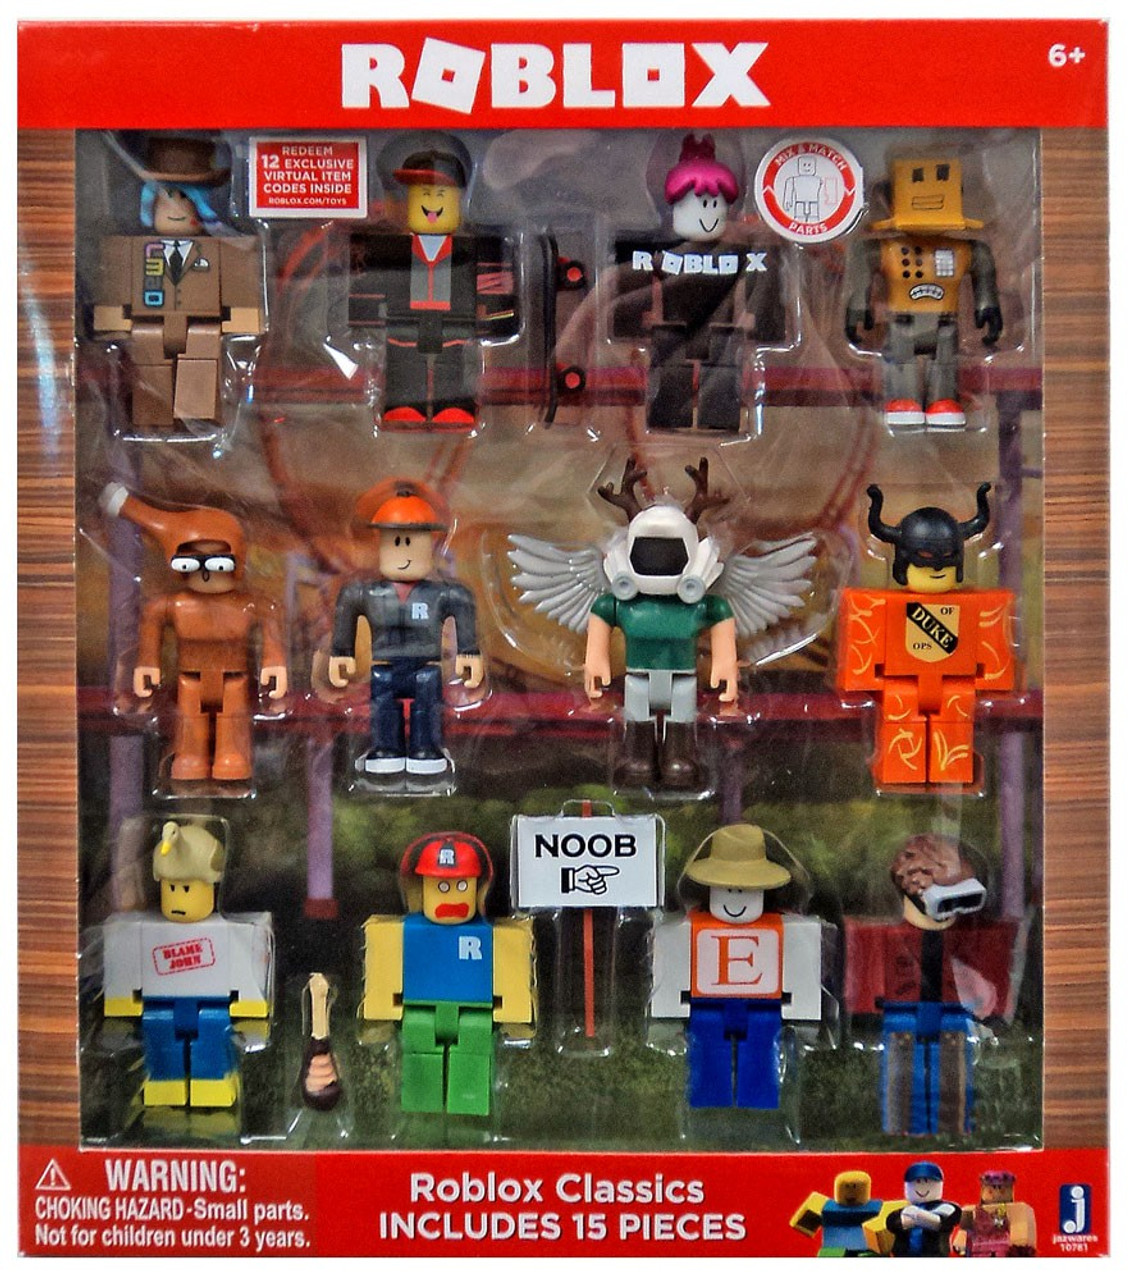 details about roblox toys action figures roblox high school 2 figures with virtual game code